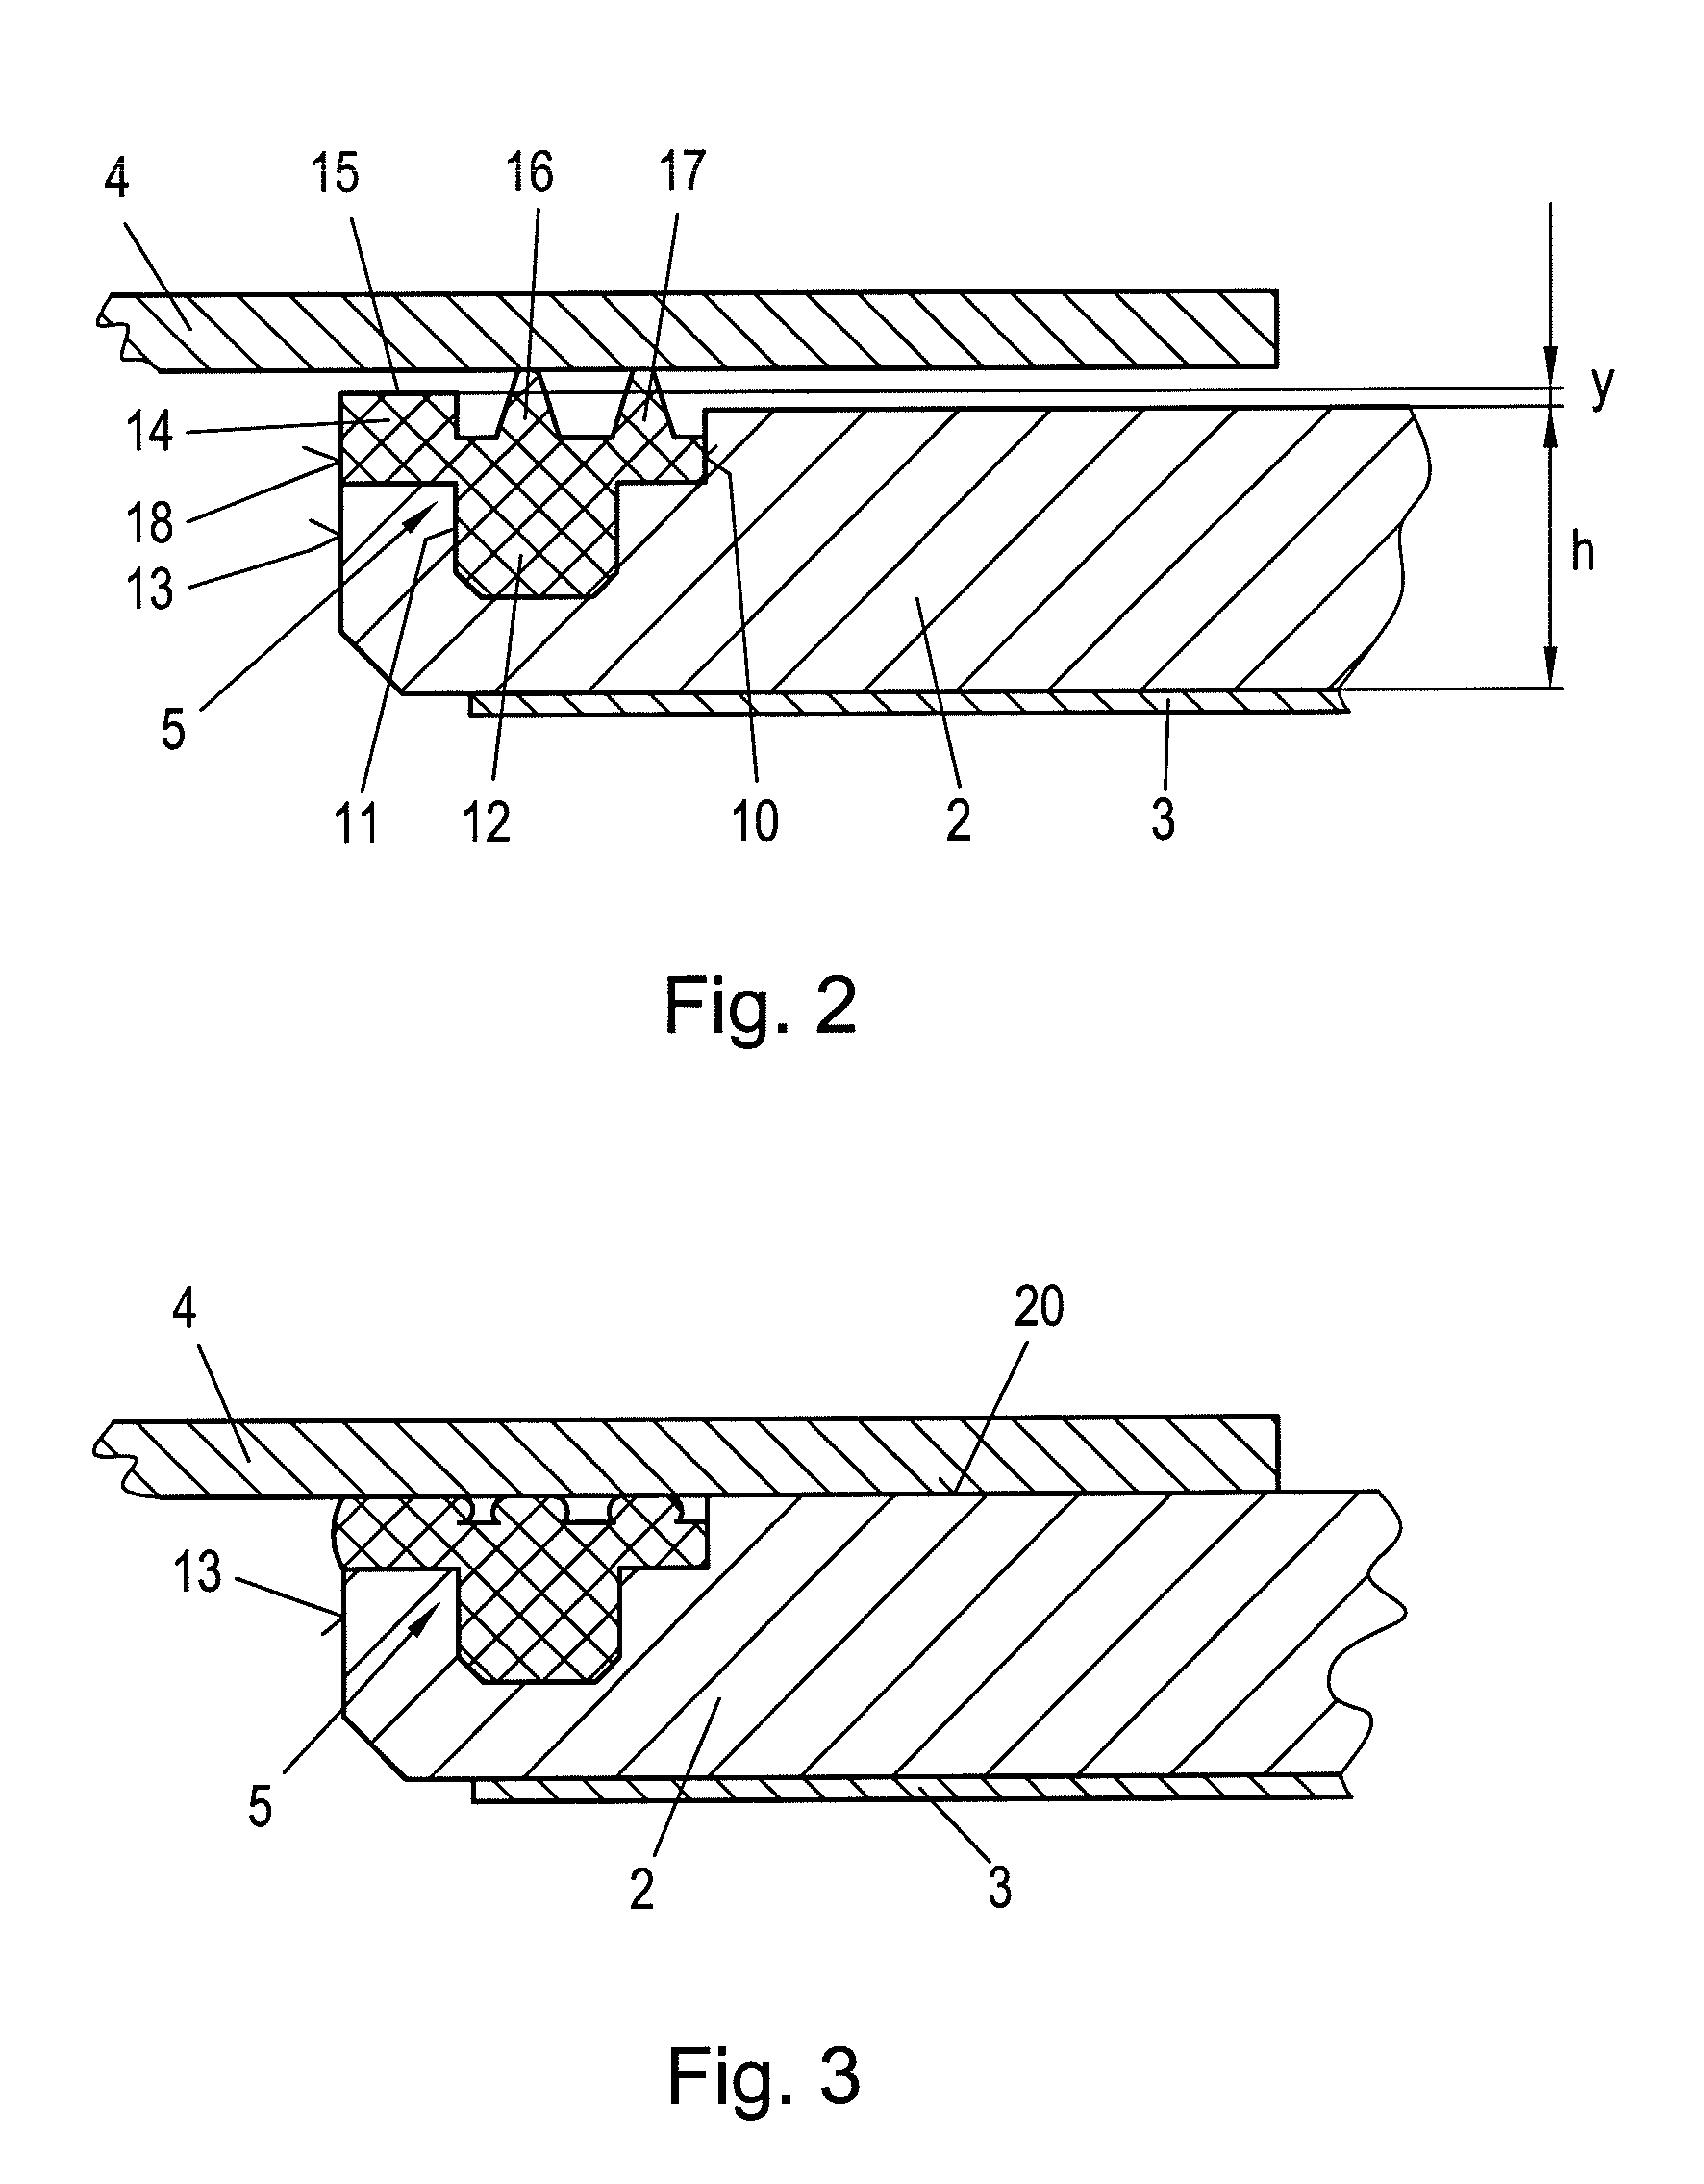 Hygiene-compliant display and control device